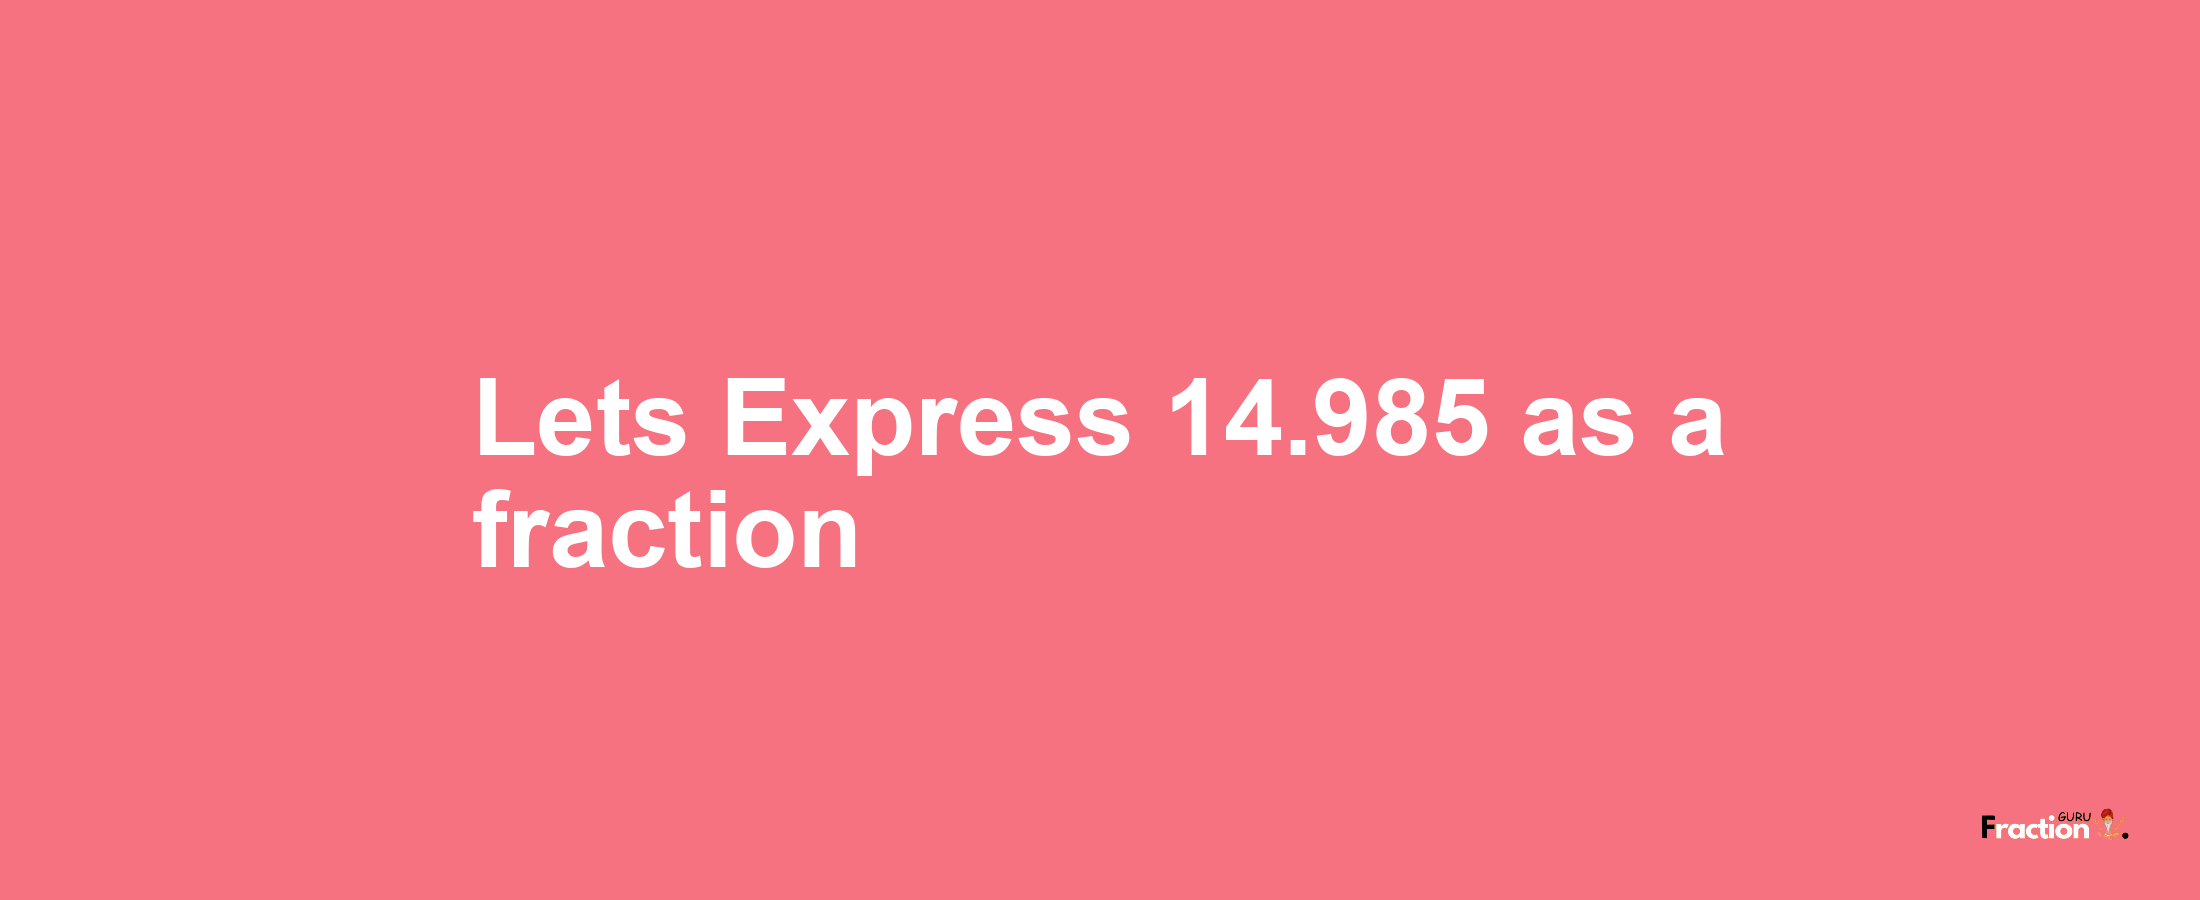 Lets Express 14.985 as afraction